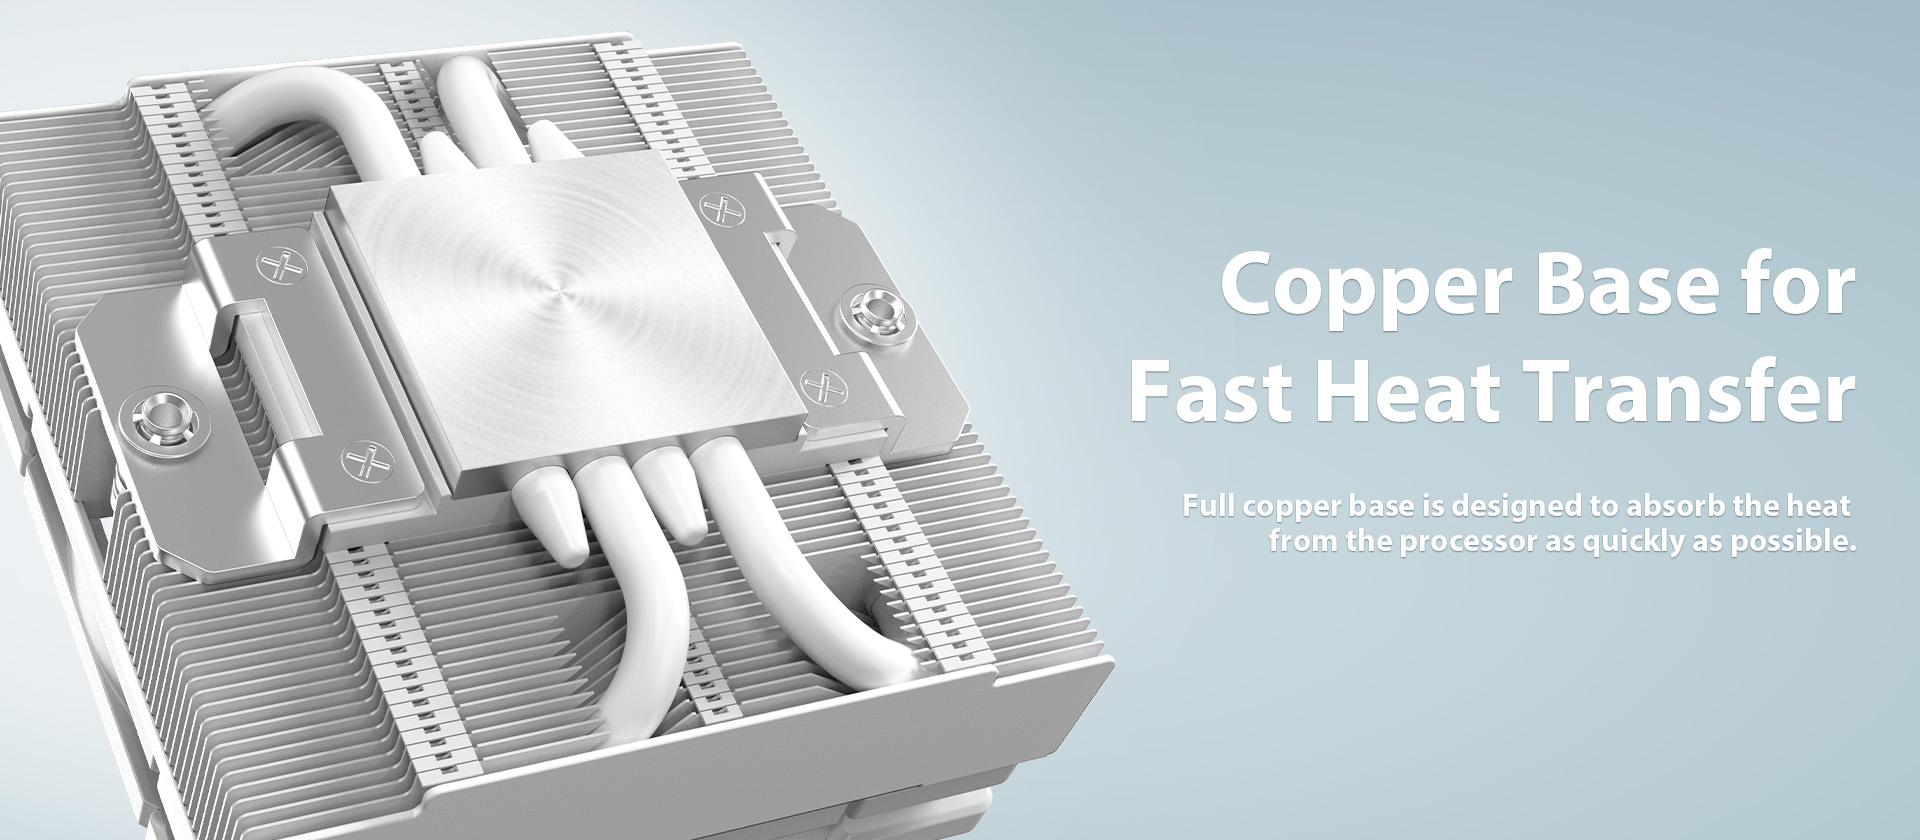 A large marketing image providing additional information about the product ID-COOLING Iceland Series IS-47-XT Low Profile CPU Cooler - White - Additional alt info not provided